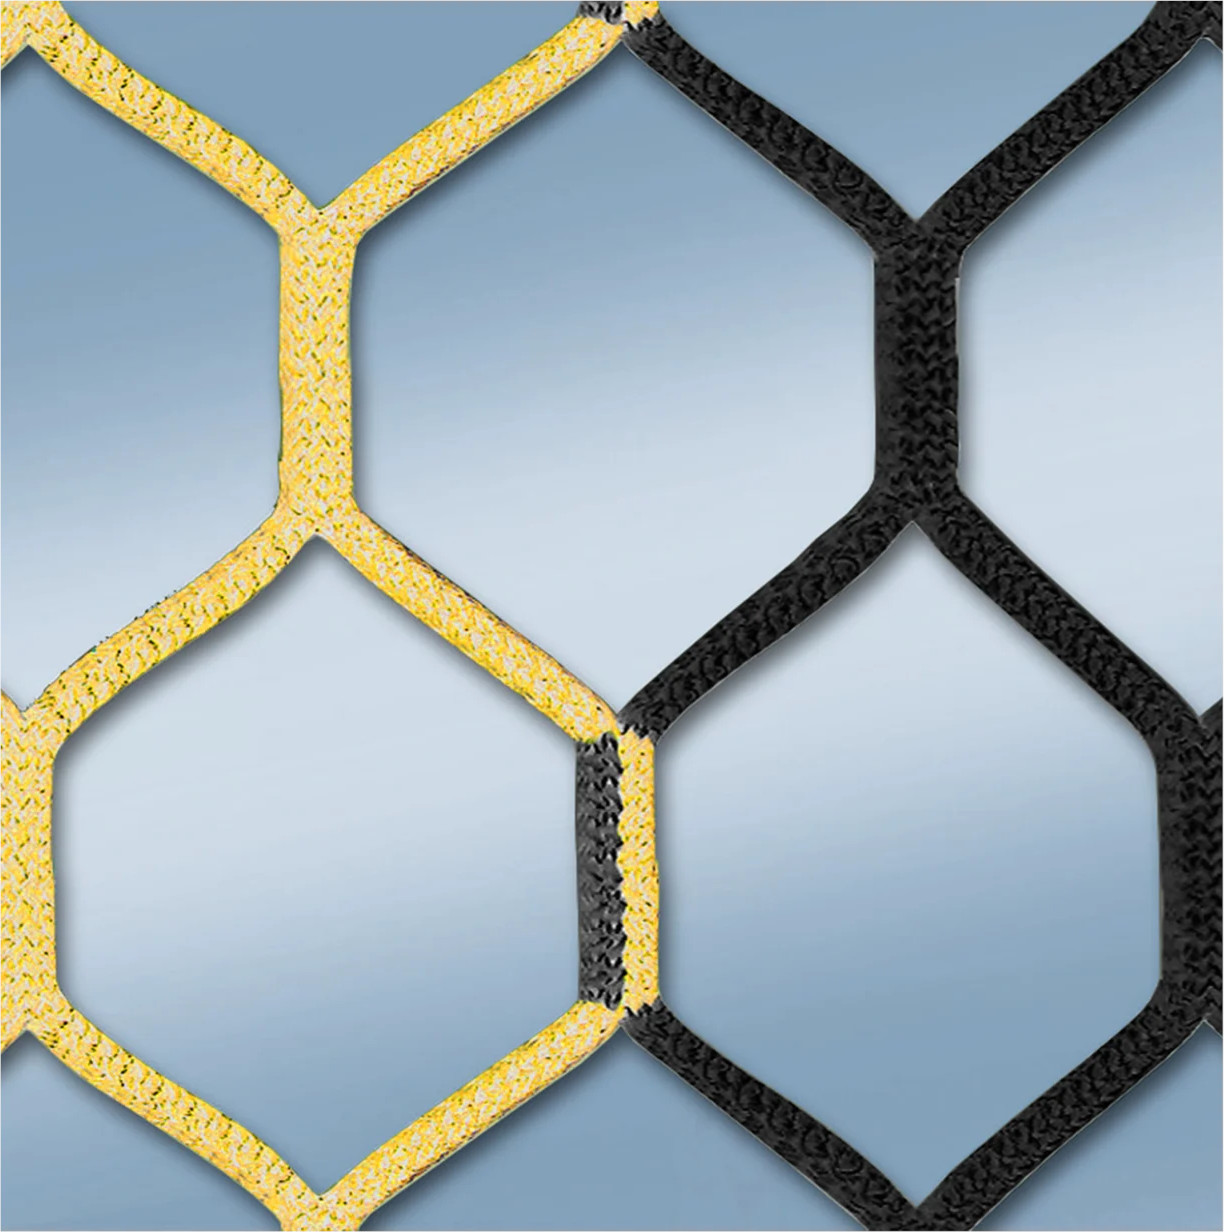 Rede Cawila Net 4MM HEX120 7,5x2,5m 2x2m Yellow/Black